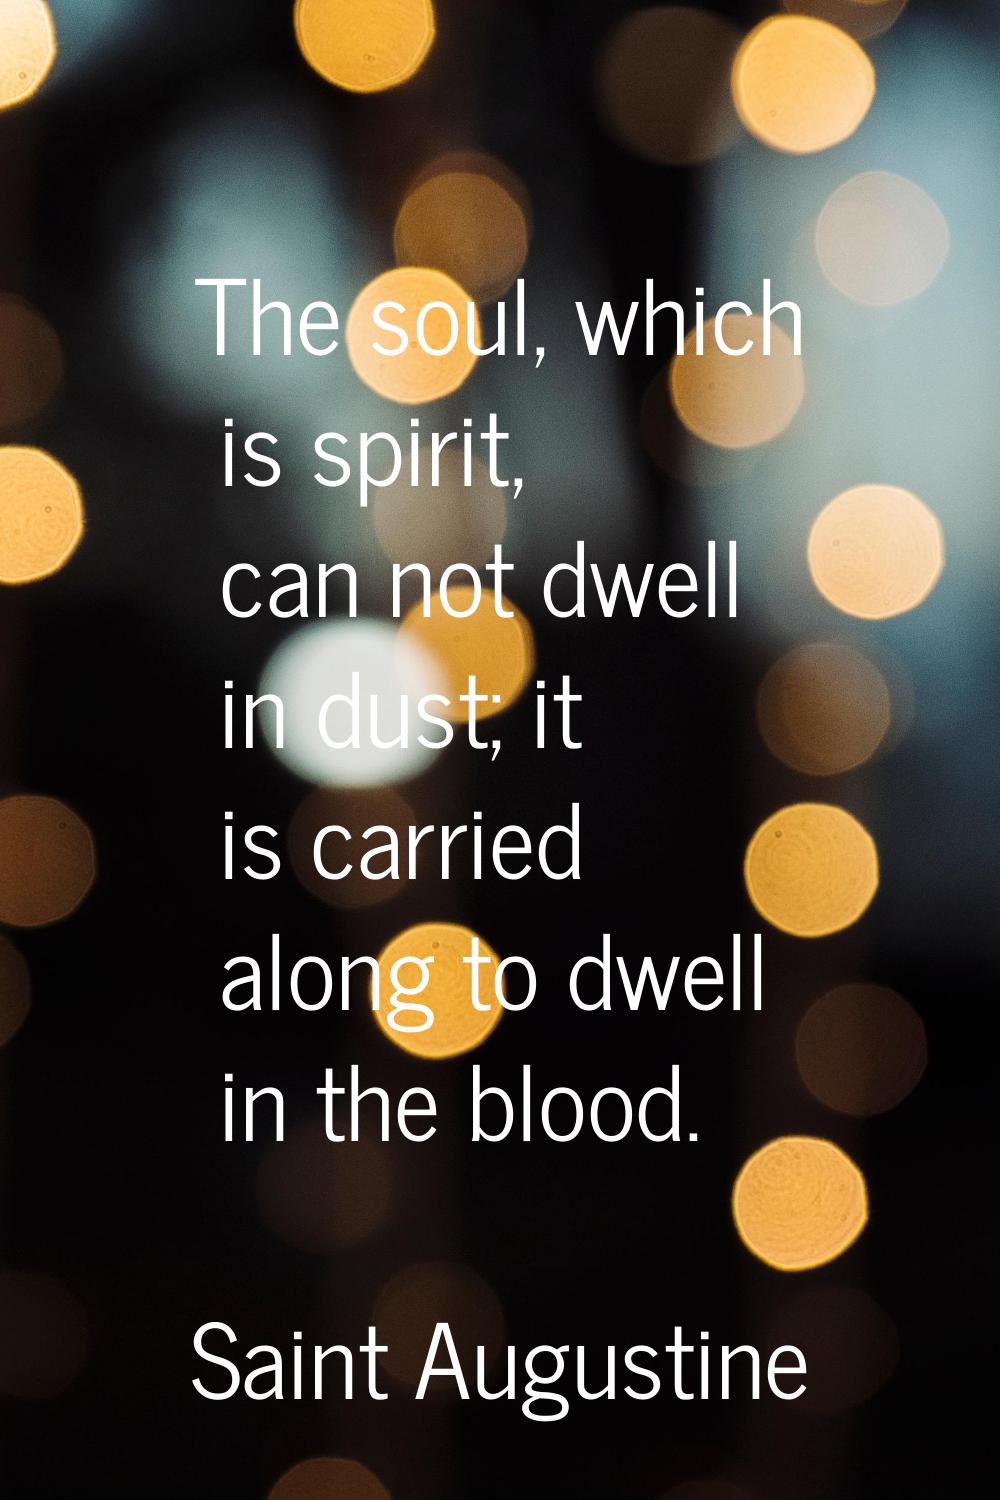 The soul, which is spirit, can not dwell in dust; it is carried along to dwell in the blood.